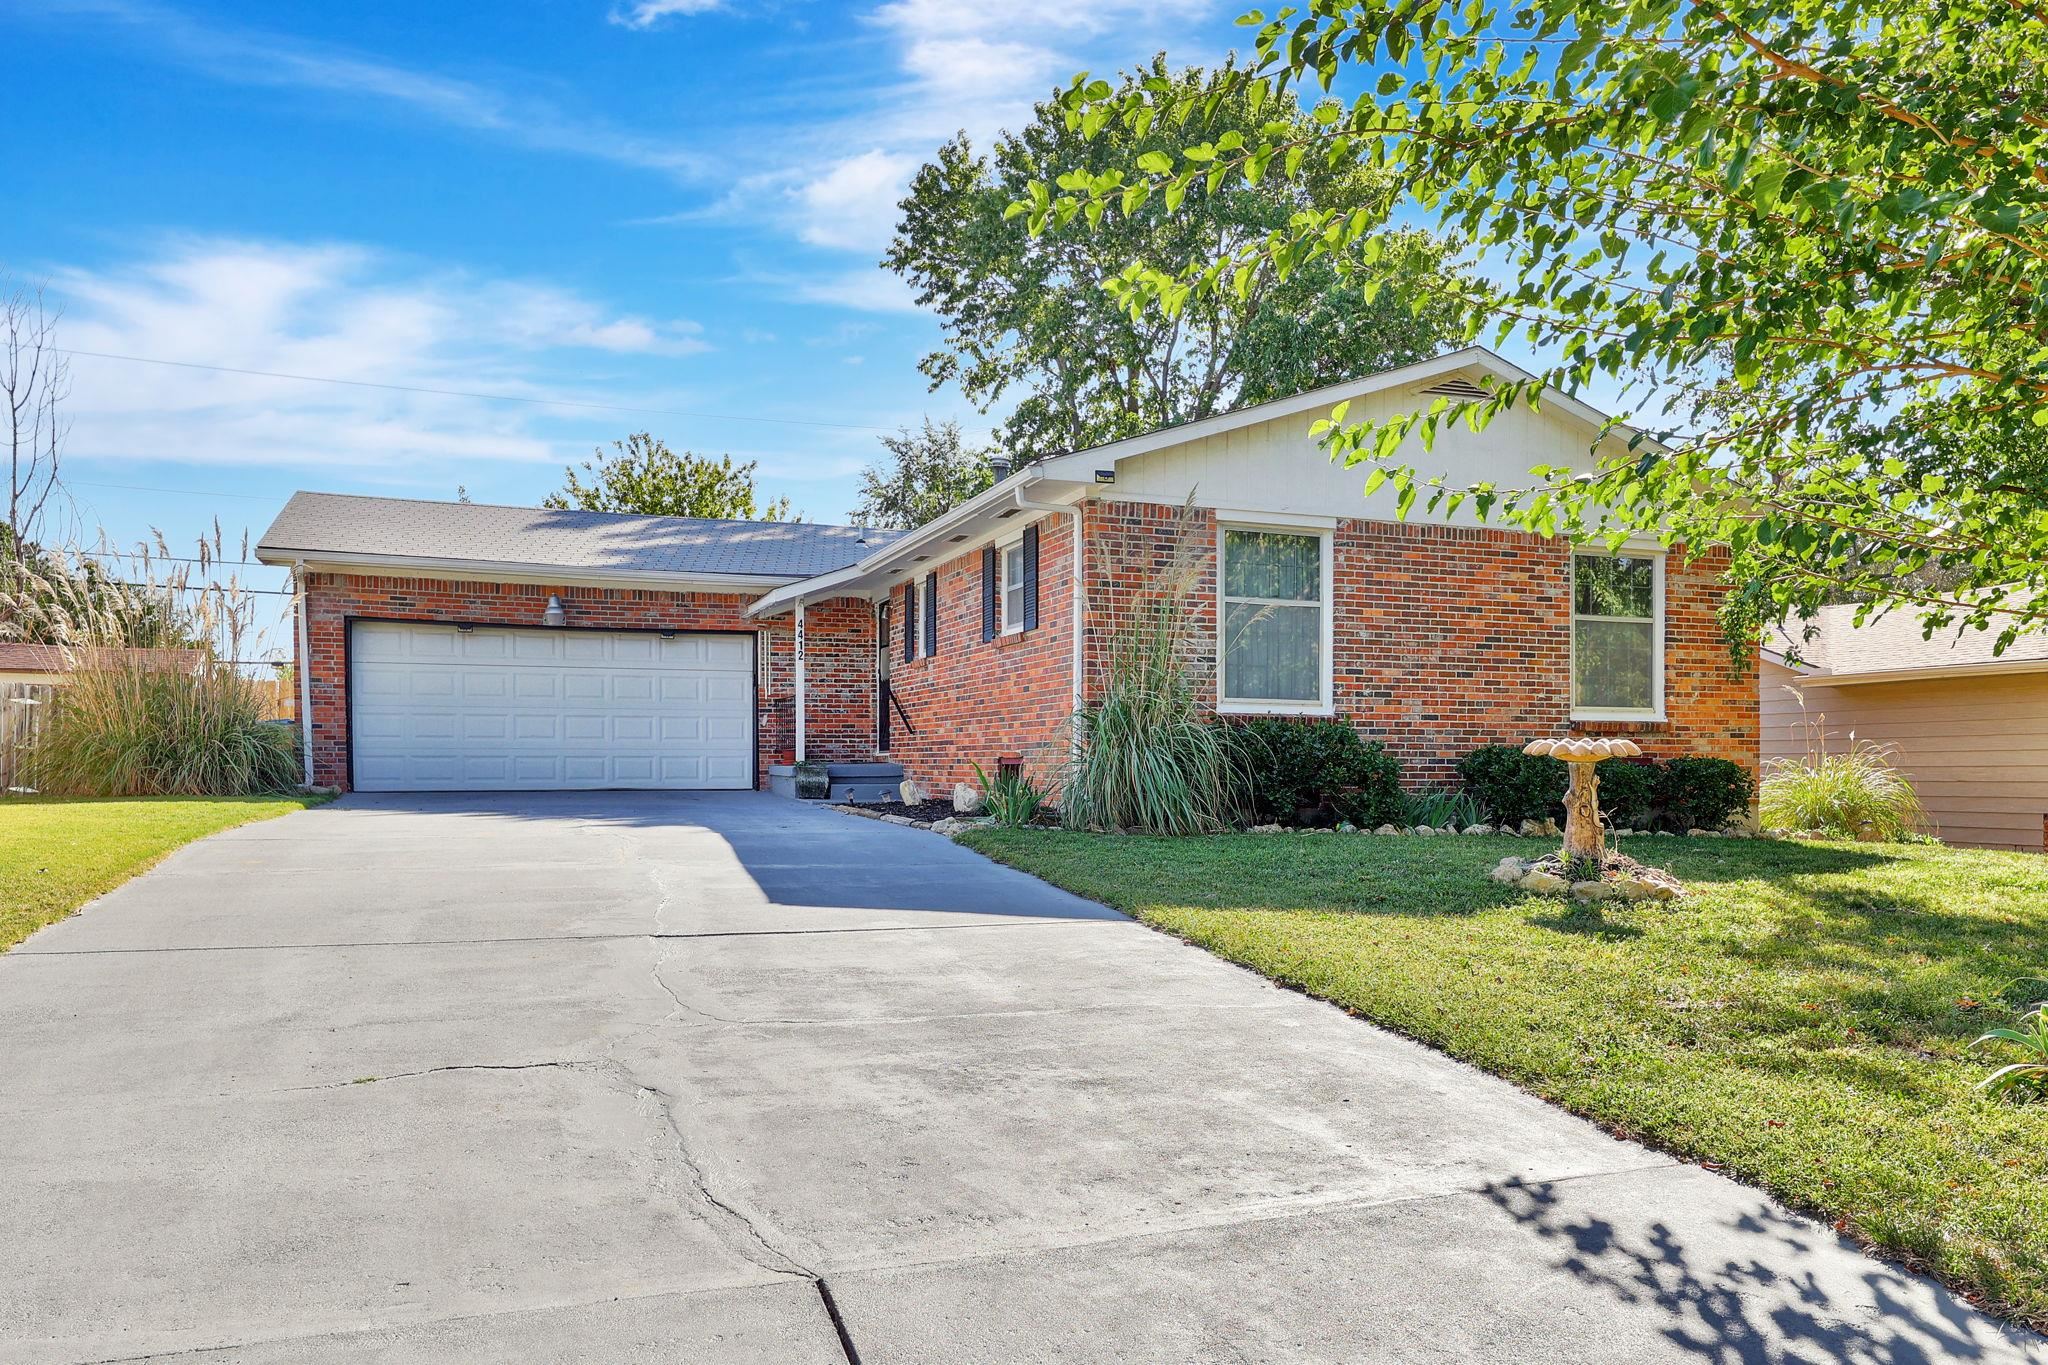 Welcome home to this all brick, ranch-style home. It’s hard to find homes in this price point that a